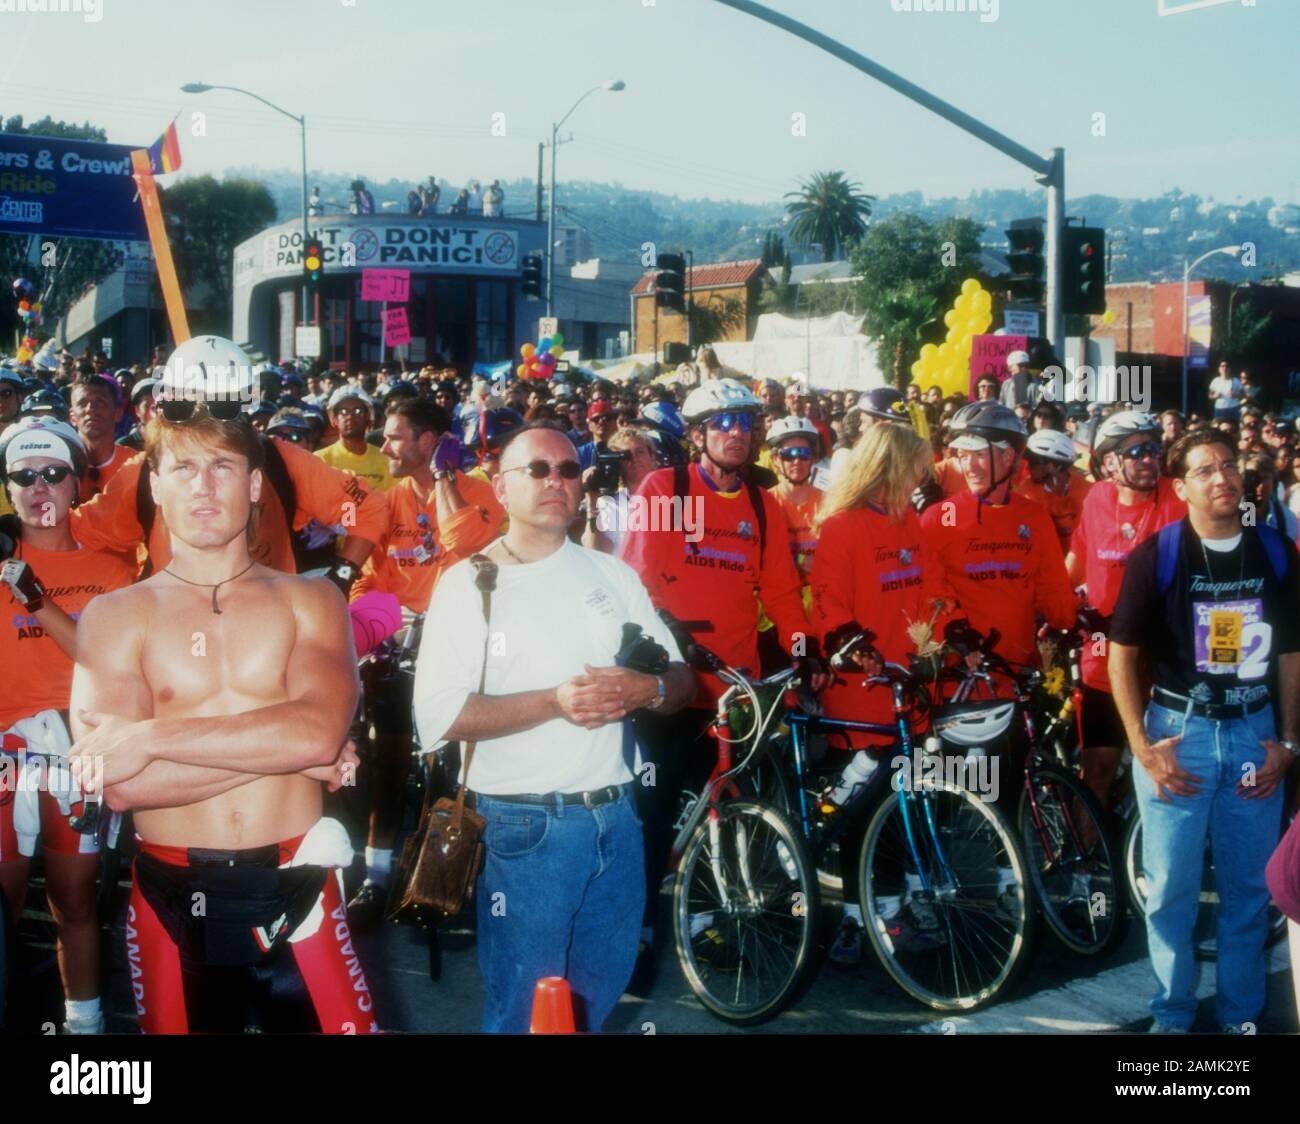 West Hollywood, California, USA 20th May 1995 (L-R) Actor Robert Desiderio and actress Judith Light attend California Aids Ride on May 20, 1995 in West Hollywood, California, USA. Photo by Barry King/Alamy Stock Photo Stock Photo